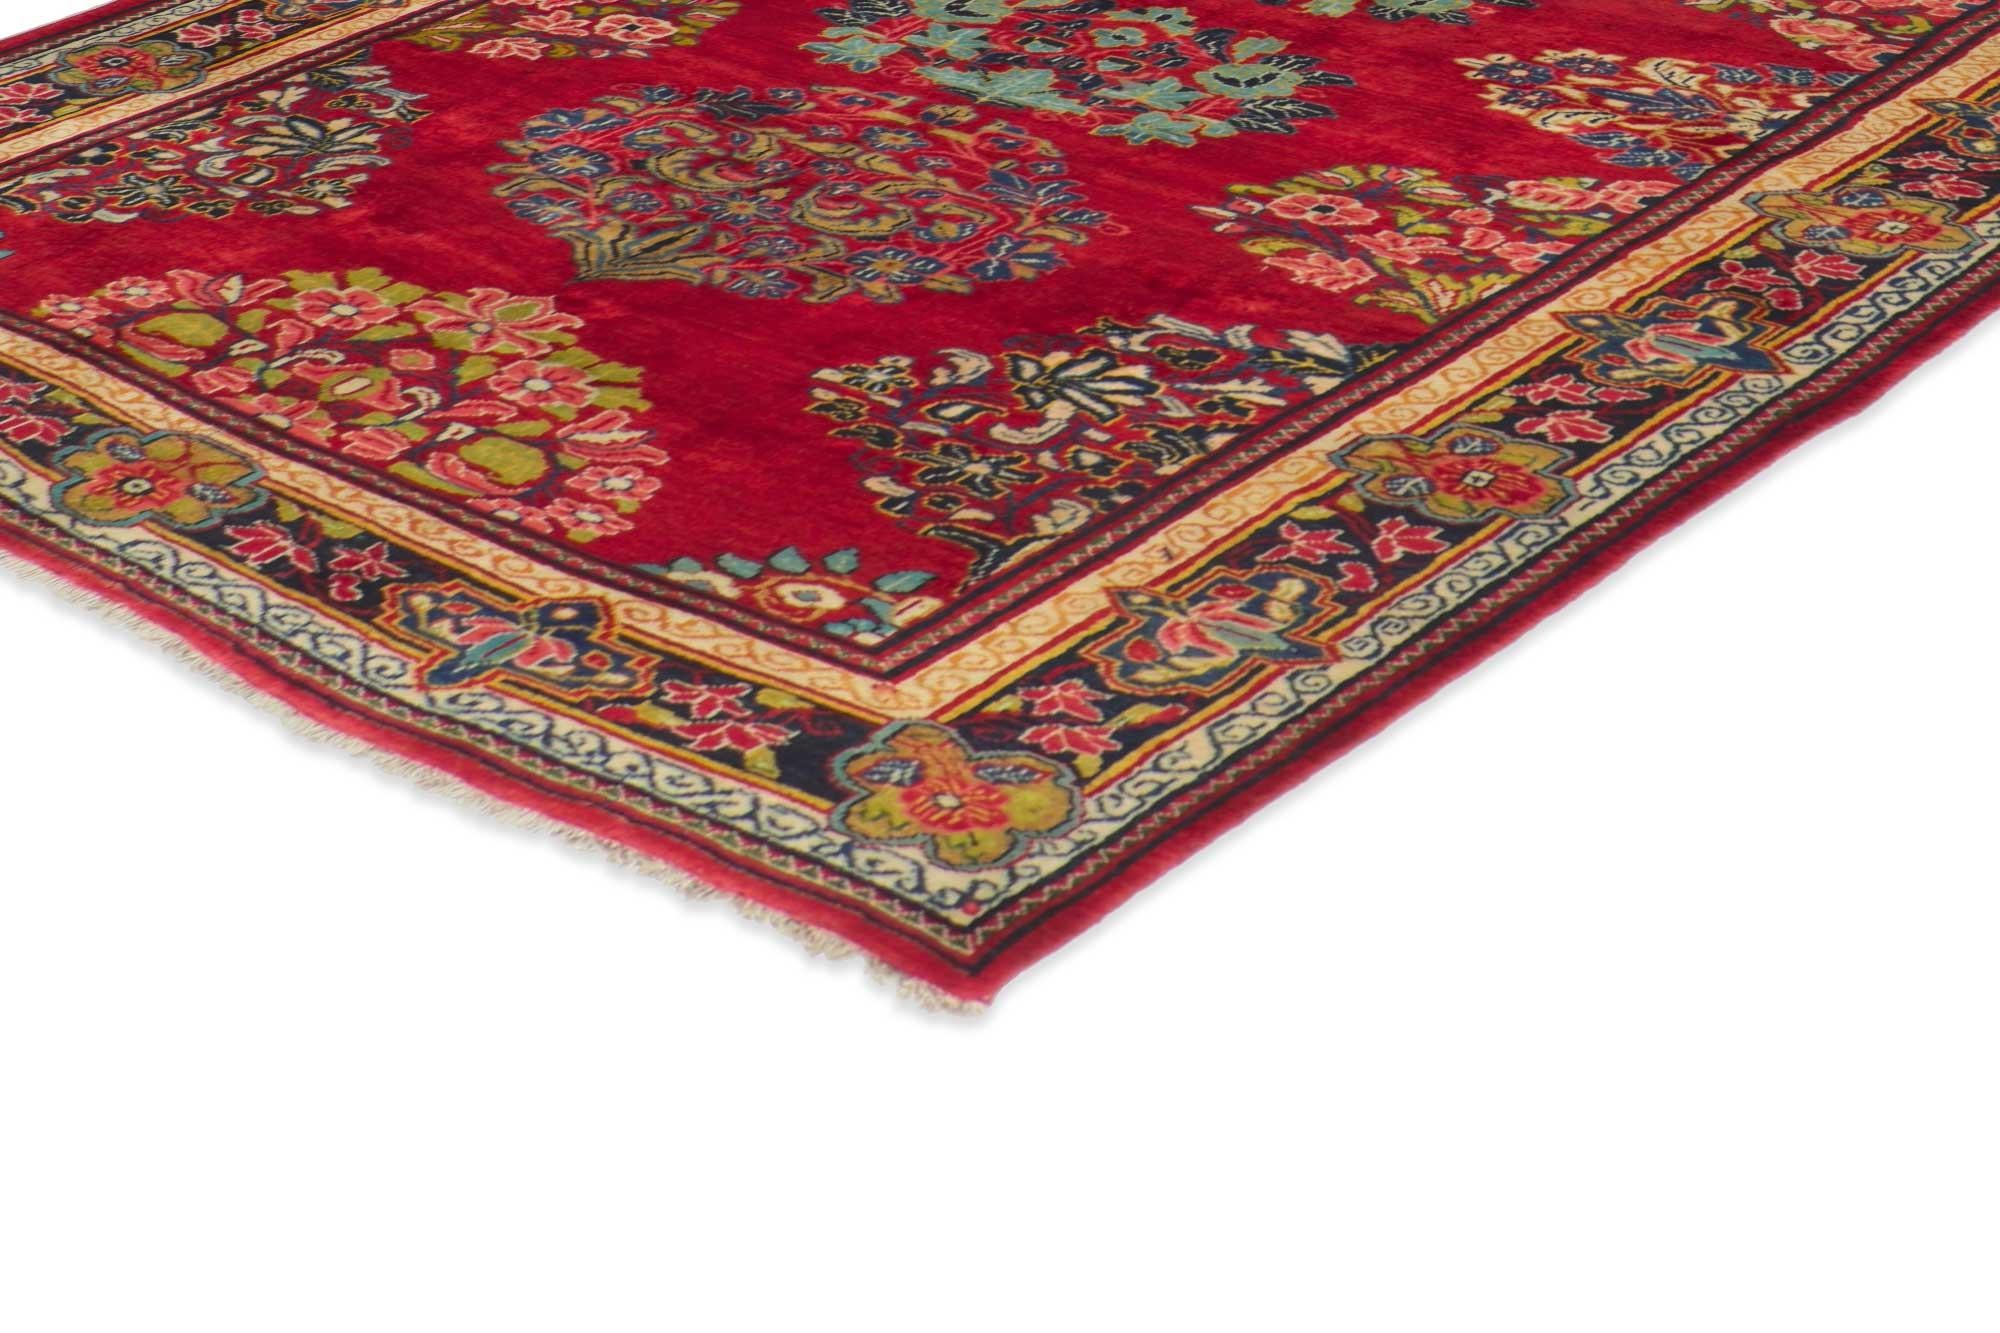 61172 Vintage Persian Mahal rug, 06'06 x 18'05.
With its timeless design, incredible detail and texture, this hand knotted wool vintage Persian Mahal rug is poised to impress. The eye-catching stylized floral pattern and saturated color palette